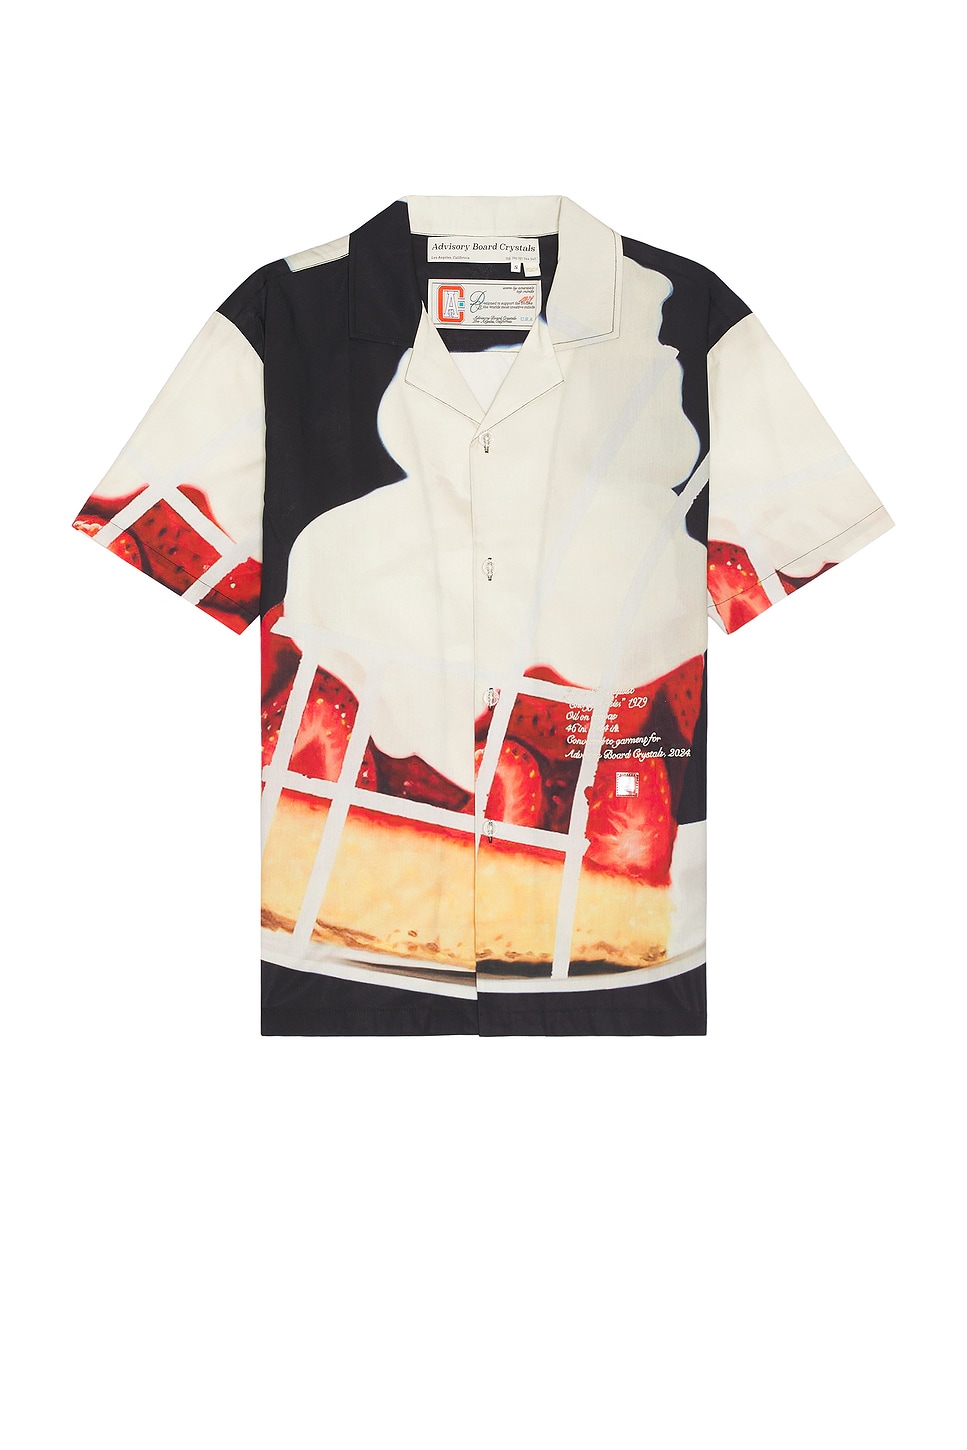 Image 1 of Advisory Board Crystals For James Rosenquist Foundation Art Shirt Energy Crisis in Print B - Energy Crisis